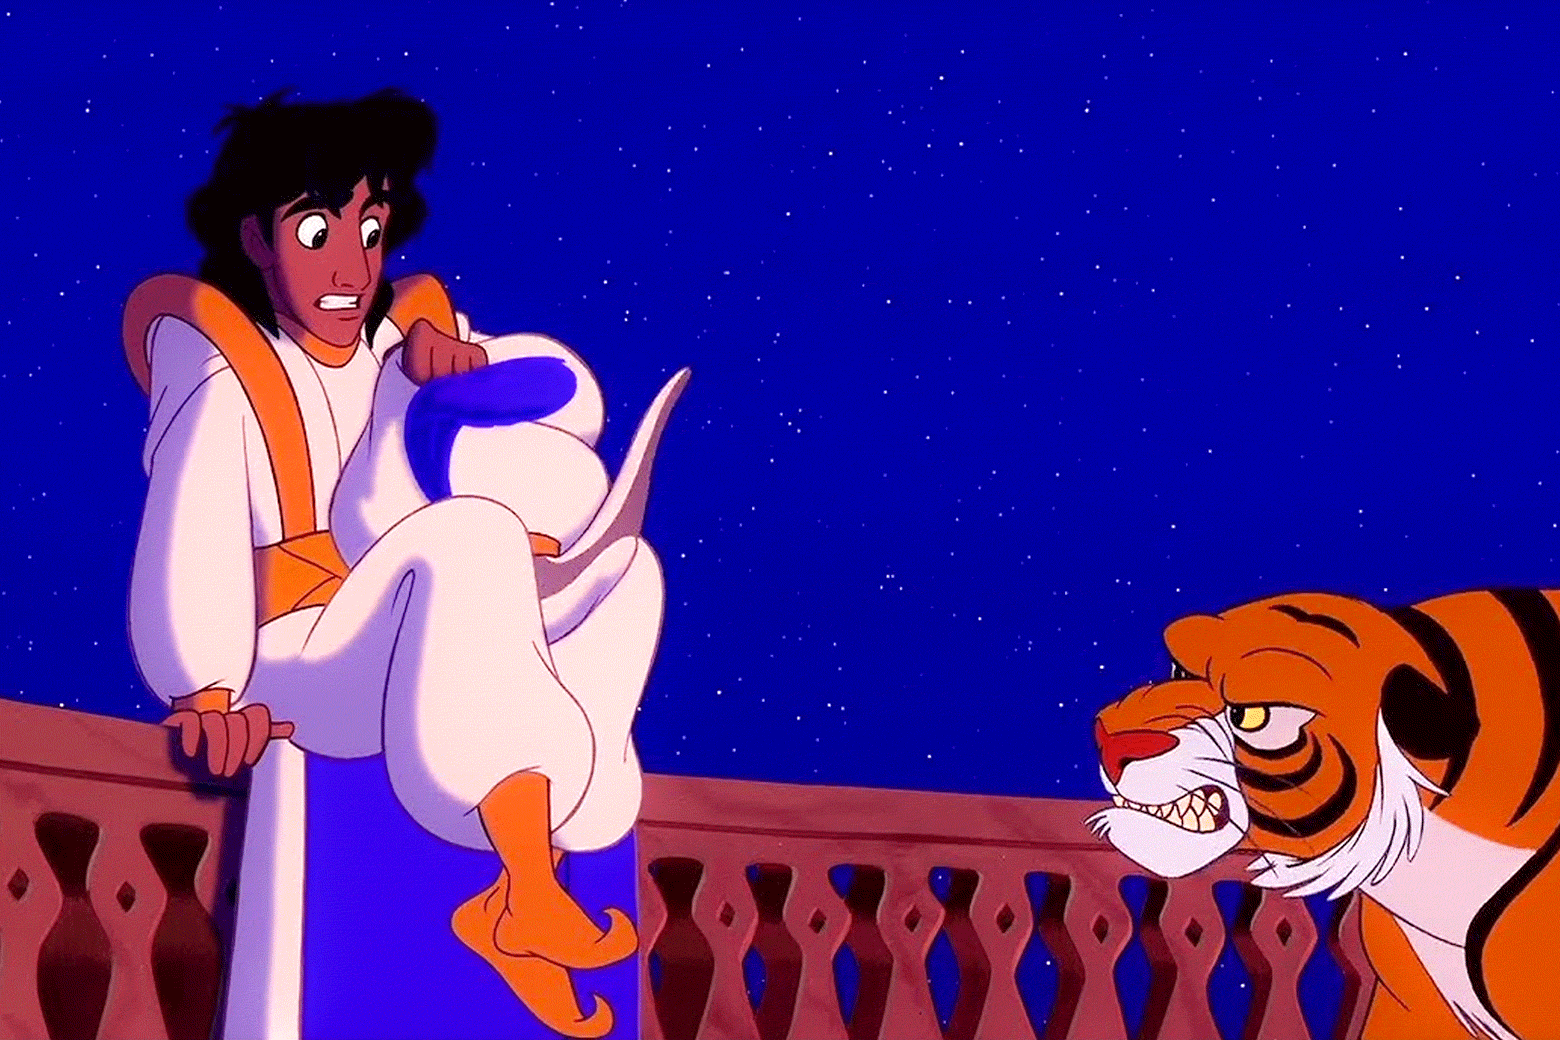 Still from Aladdin with a tiger menacing Aladdin. For a split second, "TAKE OFF YOUR CLOTHES" flashes over the image.